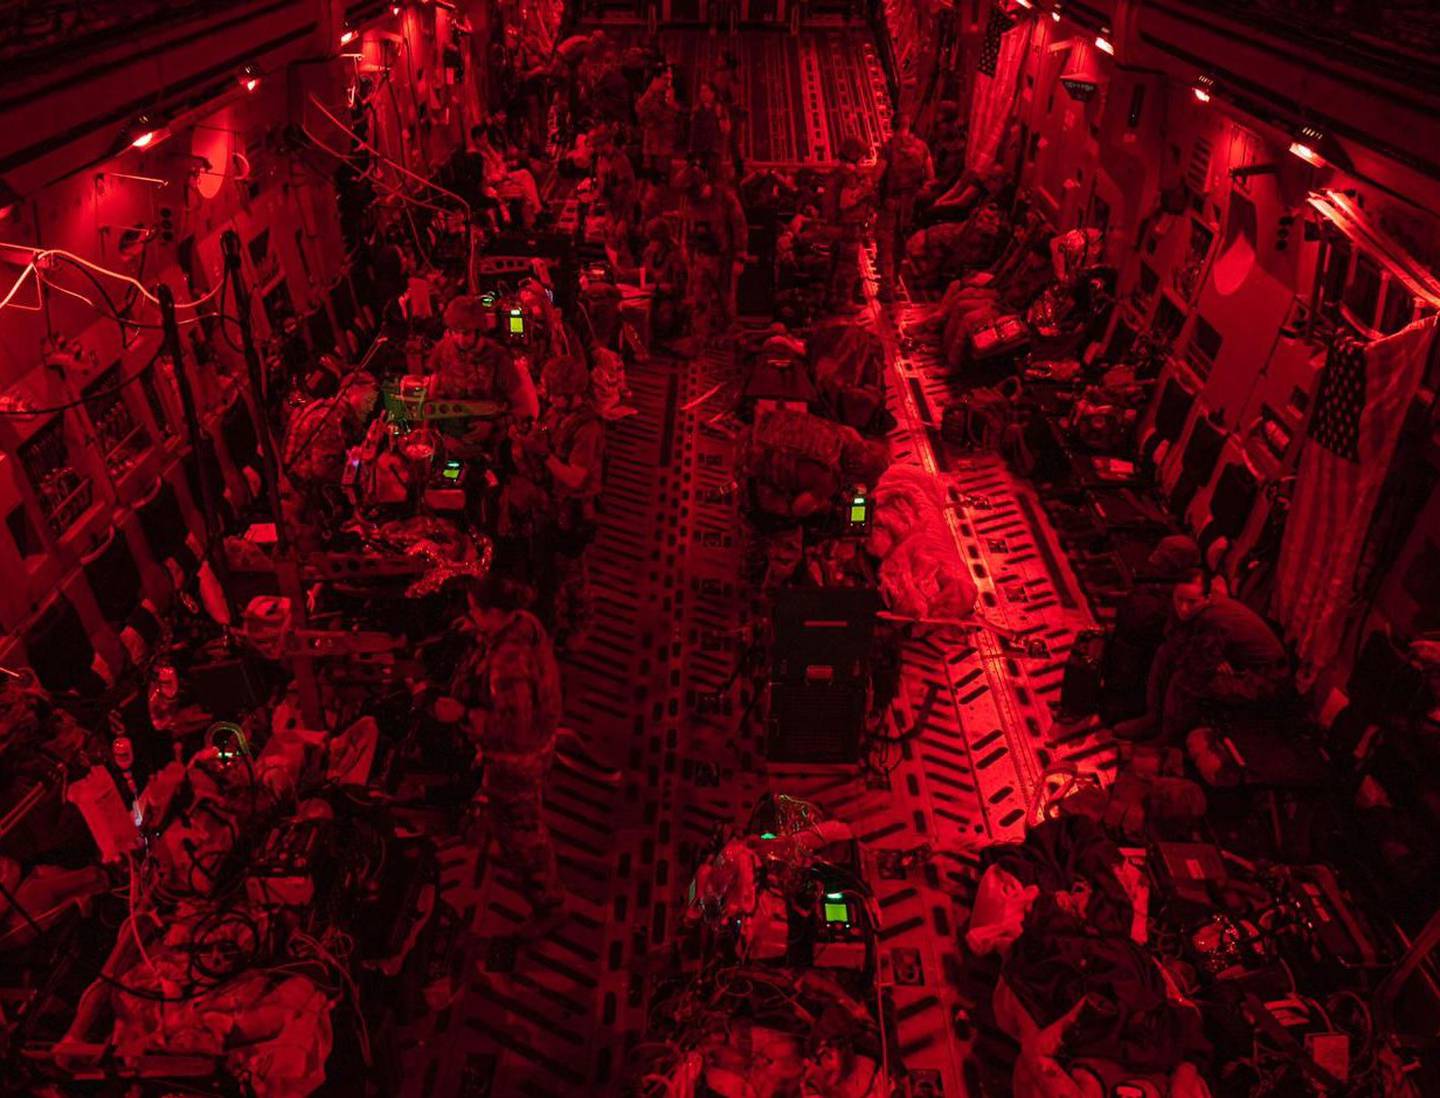 A photo taken at the end of August 2021 shows one of the first aeromedical evacuation flights out following the suicide bombing at the Kabul airport. It carried the most critically wounded from Hamid Karzai International Airport to Germany. Each green light is a ventilator and indicates a patient on life support. (Courtesy of Capt. Carlos Mendoza/Air Force)